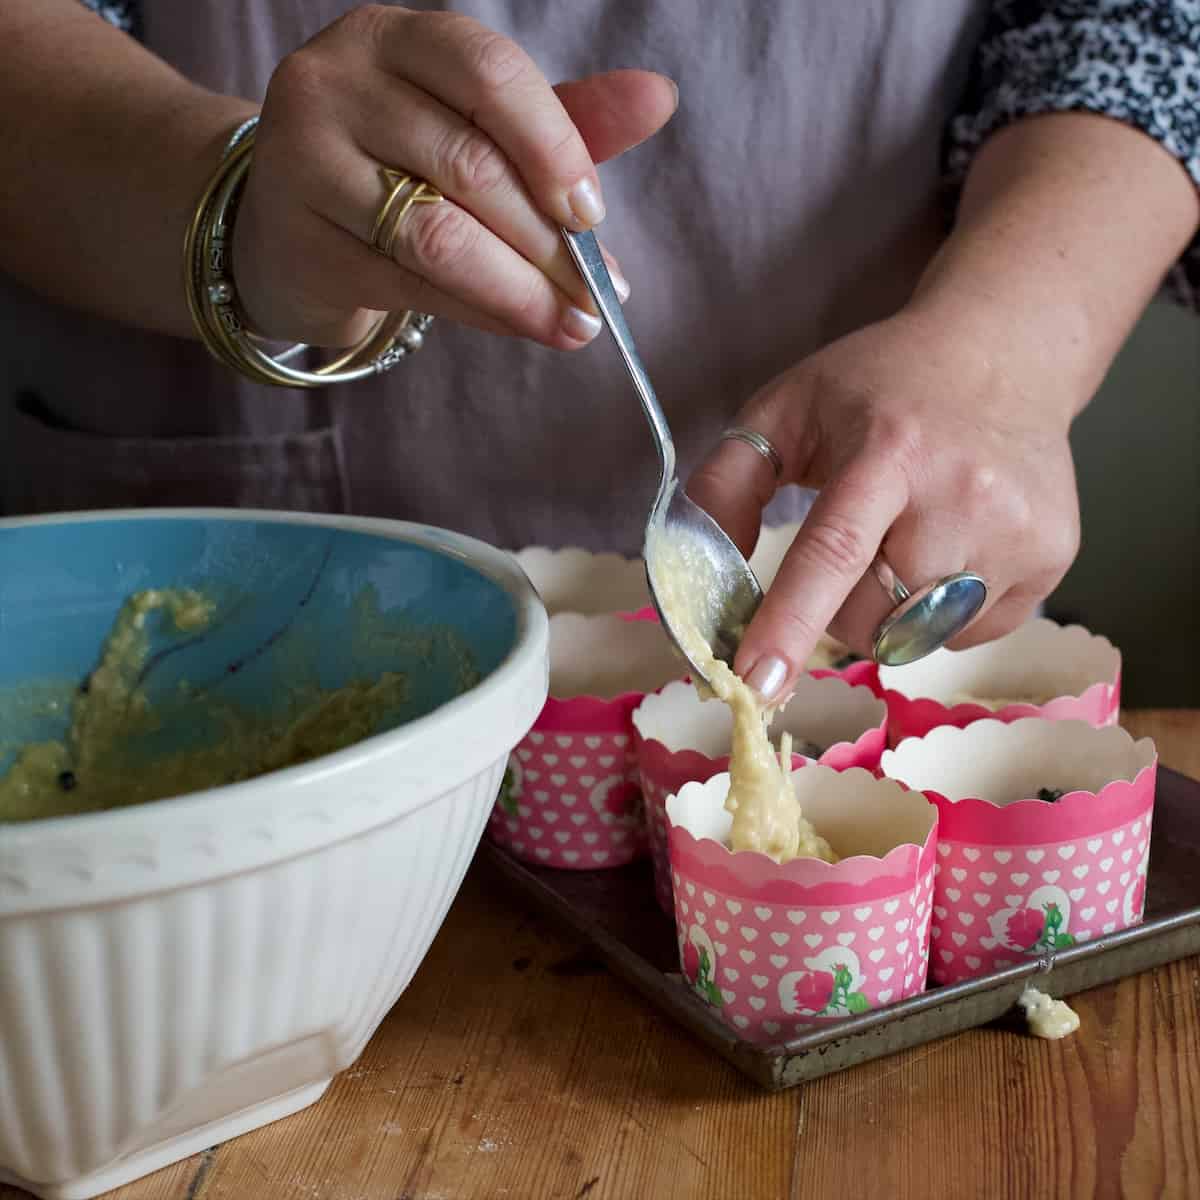 Woman spooning muffin batter from a blue and white mixing bowl into individual pink cupcake cases